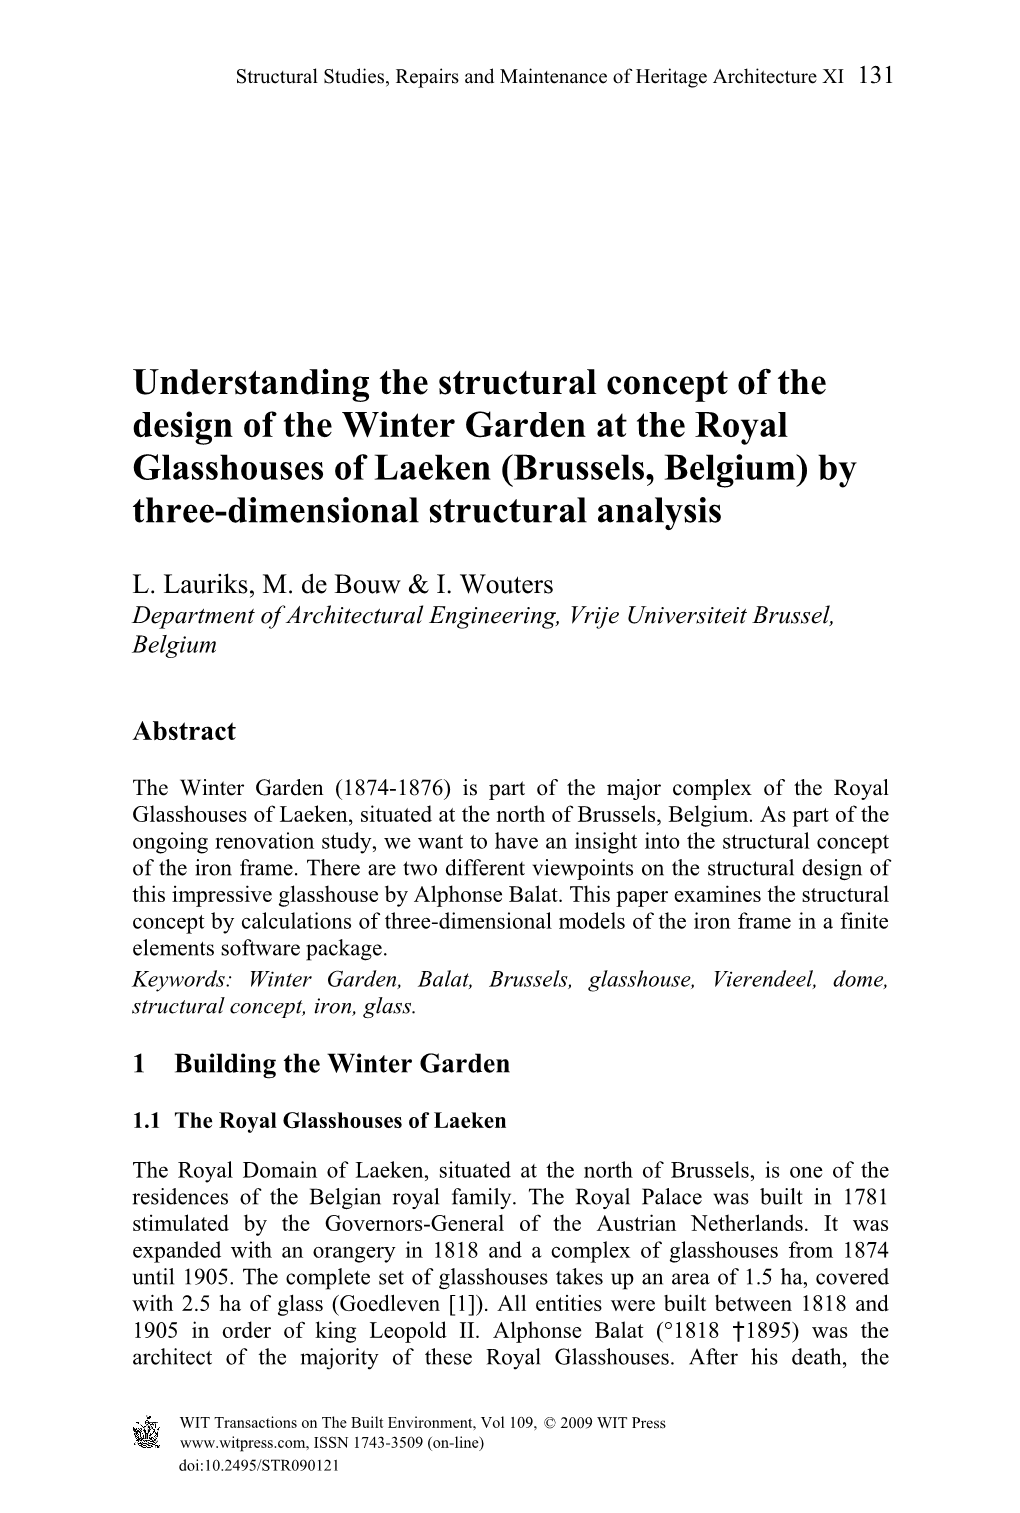 Understanding the Structural Concept of the Design of the Winter Garden